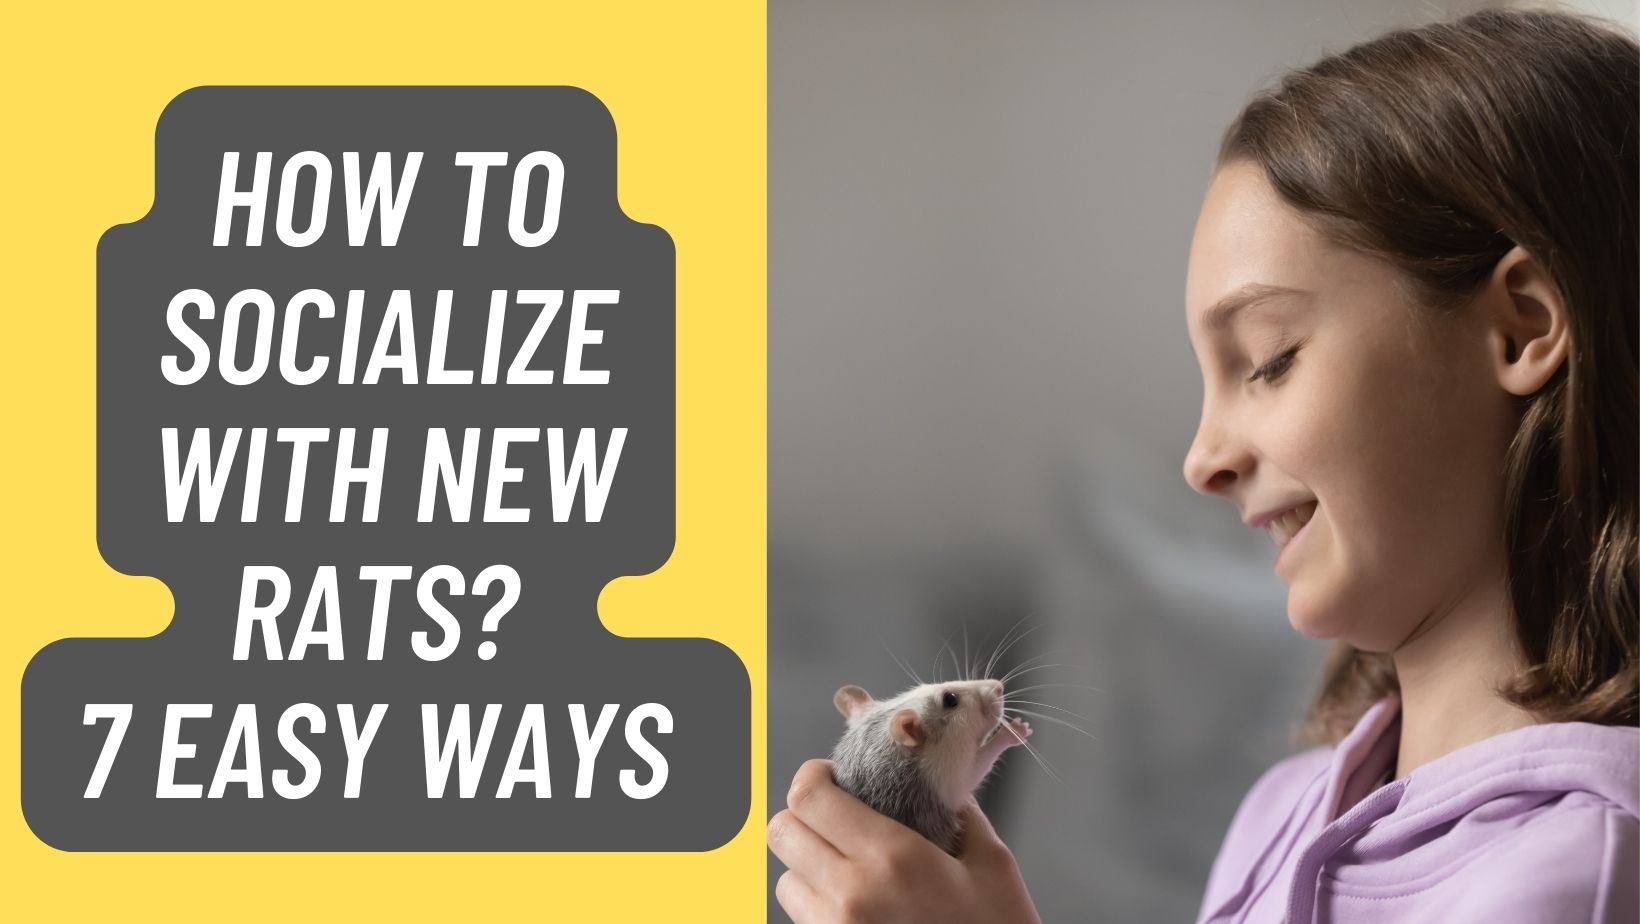 Socializing New Rats? How To 7 Easy Ways